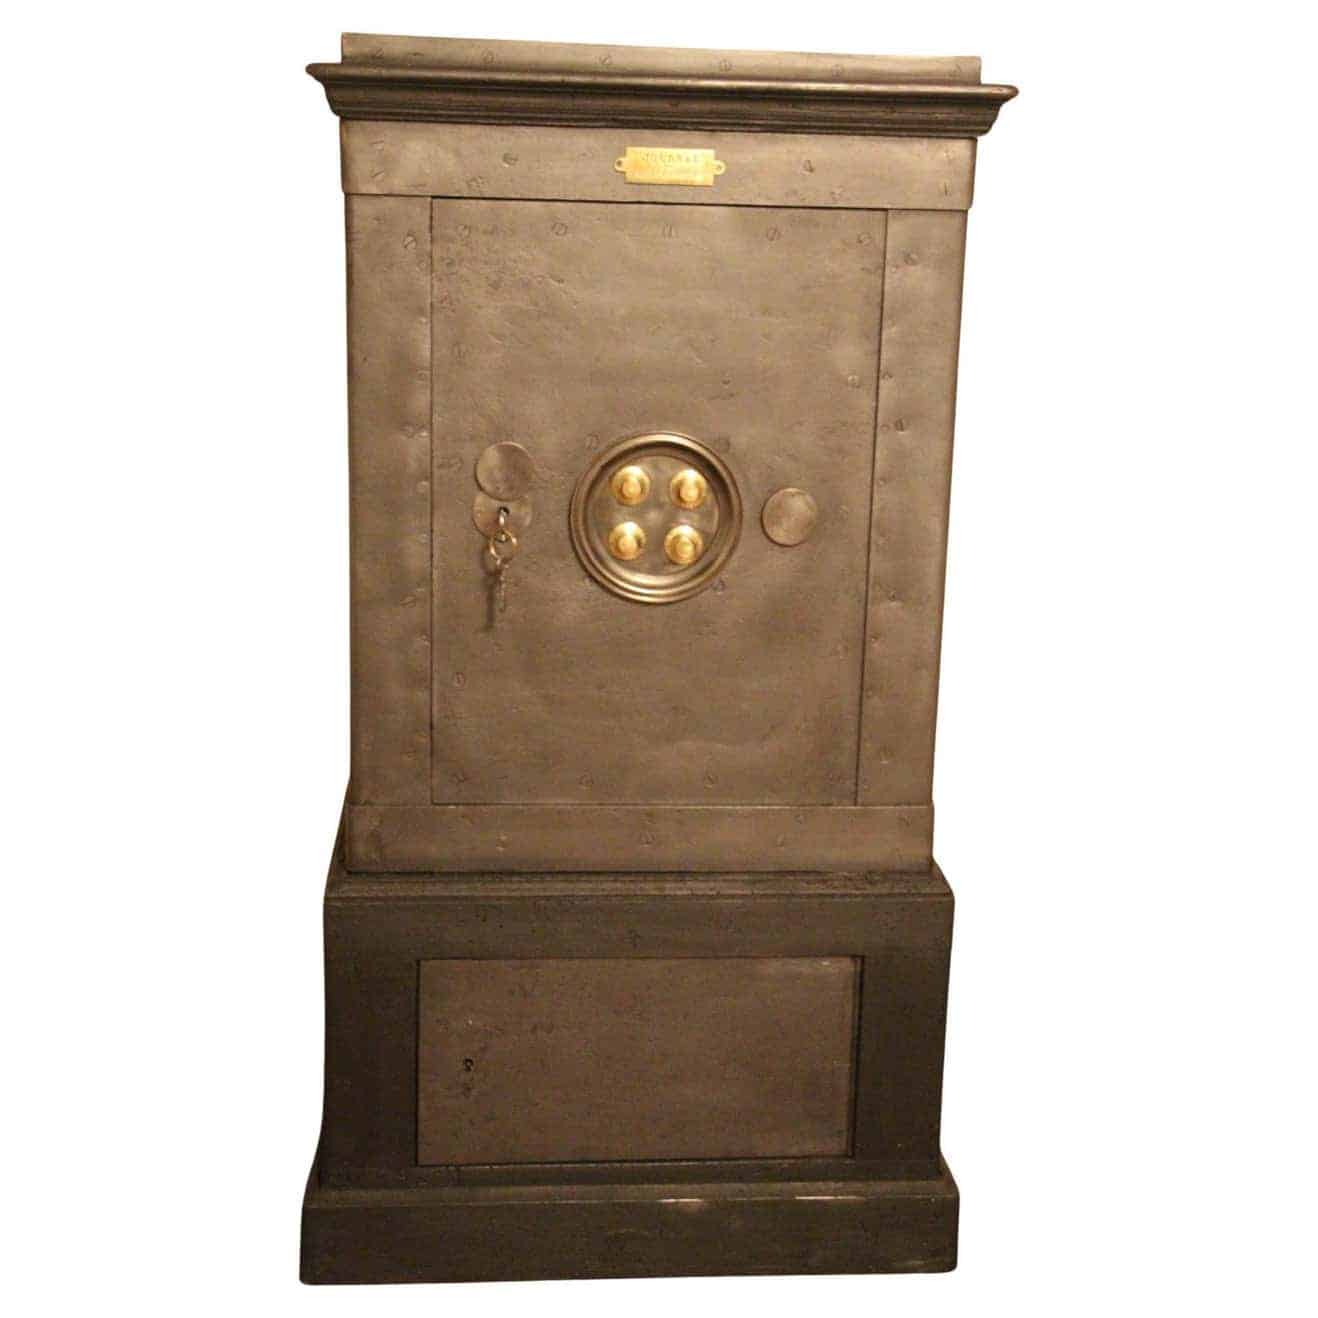 Black iron, steel, and wood safe